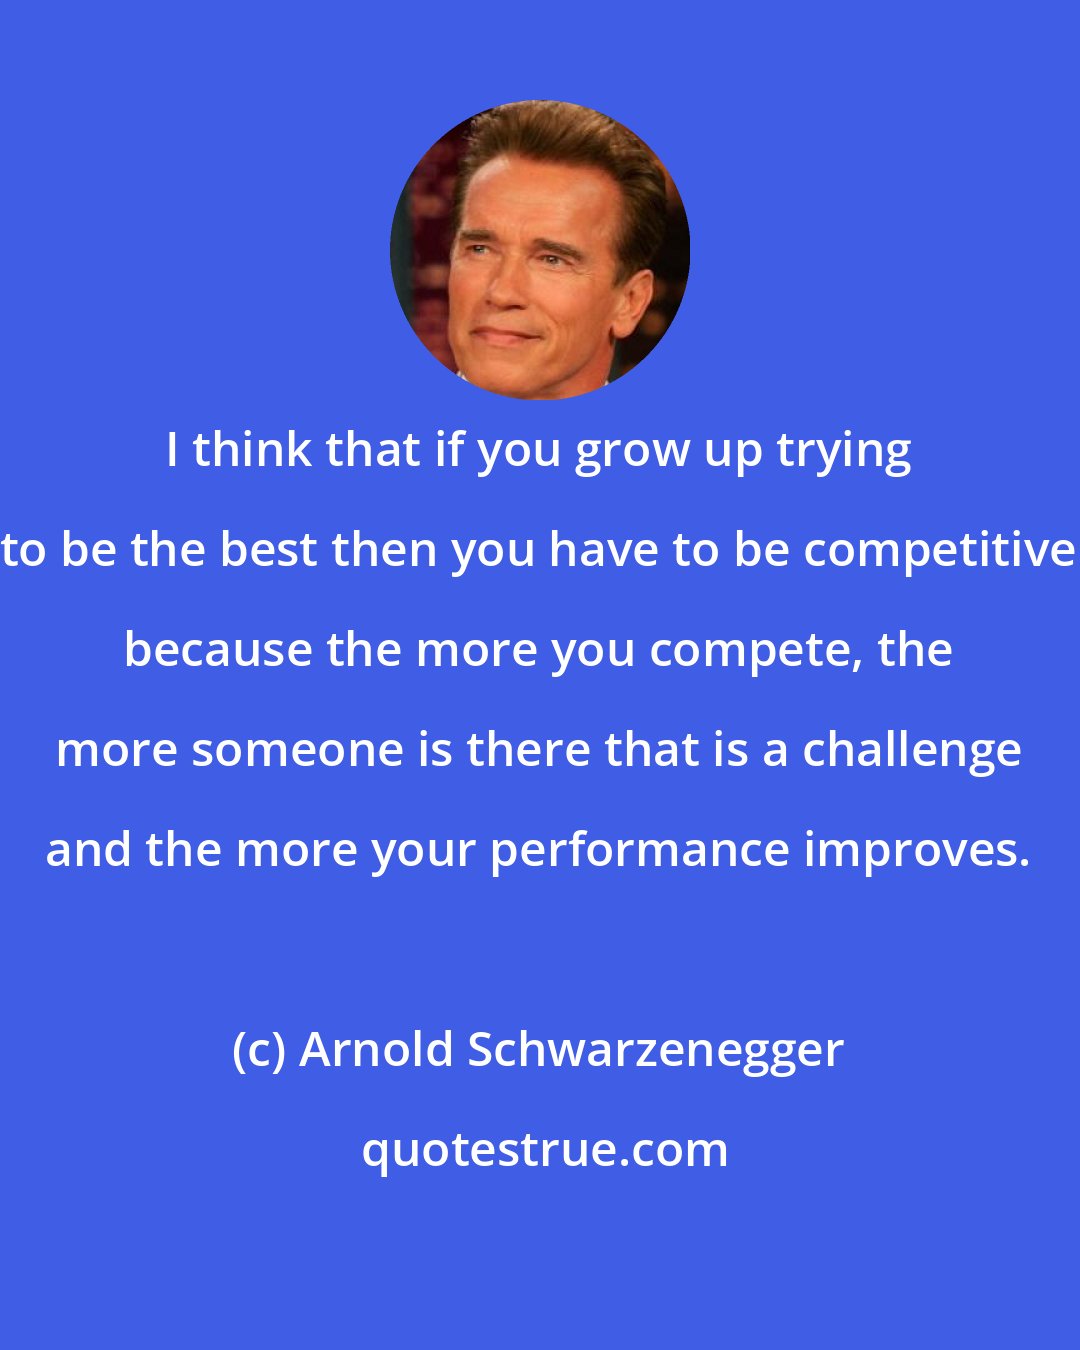 Arnold Schwarzenegger: I think that if you grow up trying to be the best then you have to be competitive because the more you compete, the more someone is there that is a challenge and the more your performance improves.